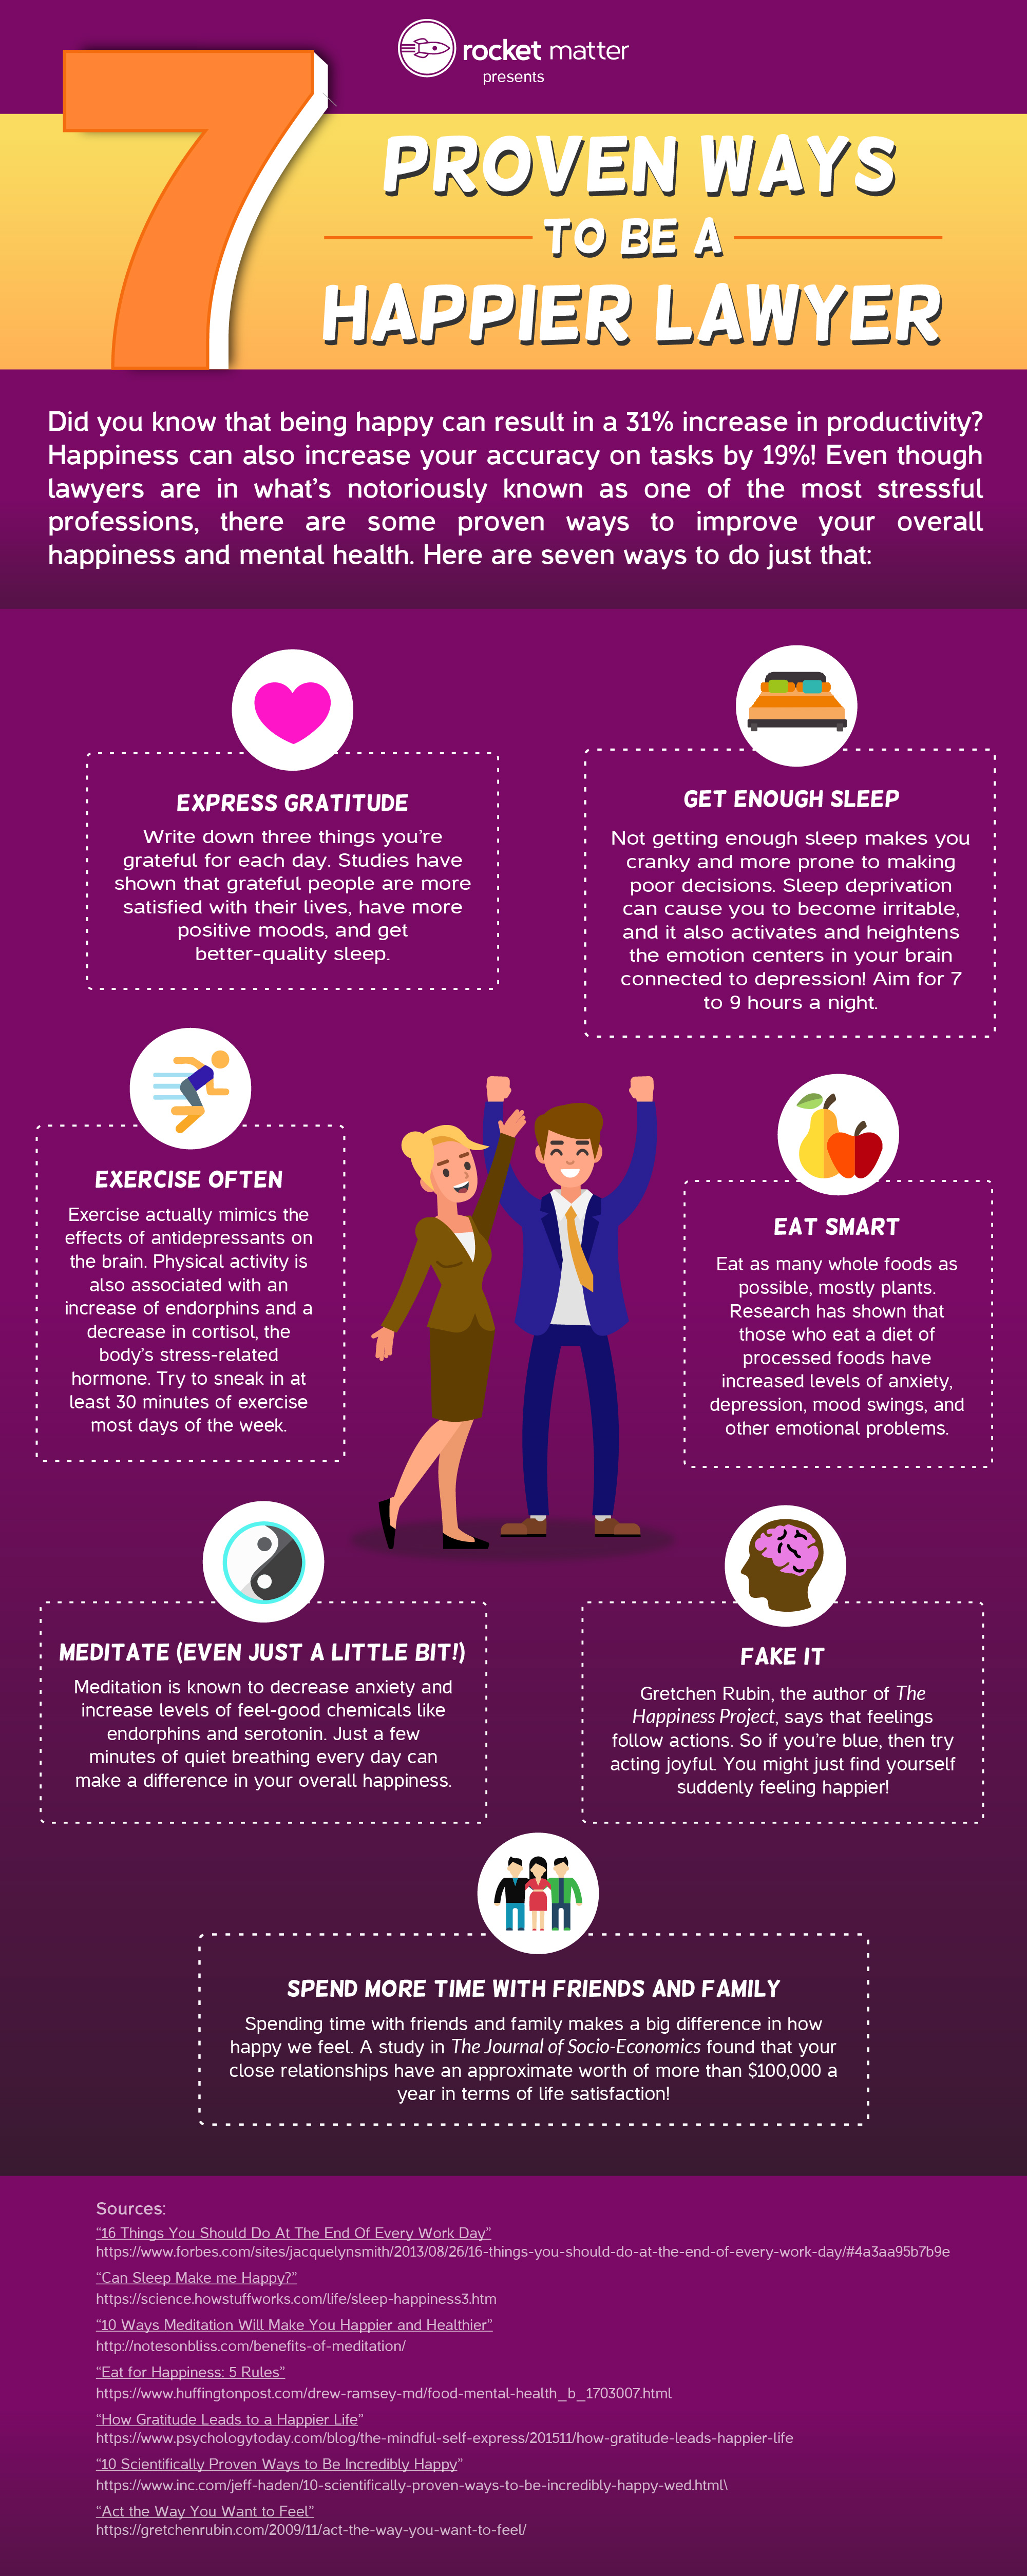 7 Proven Ways to Be a Happier Lawyer (Infographic)